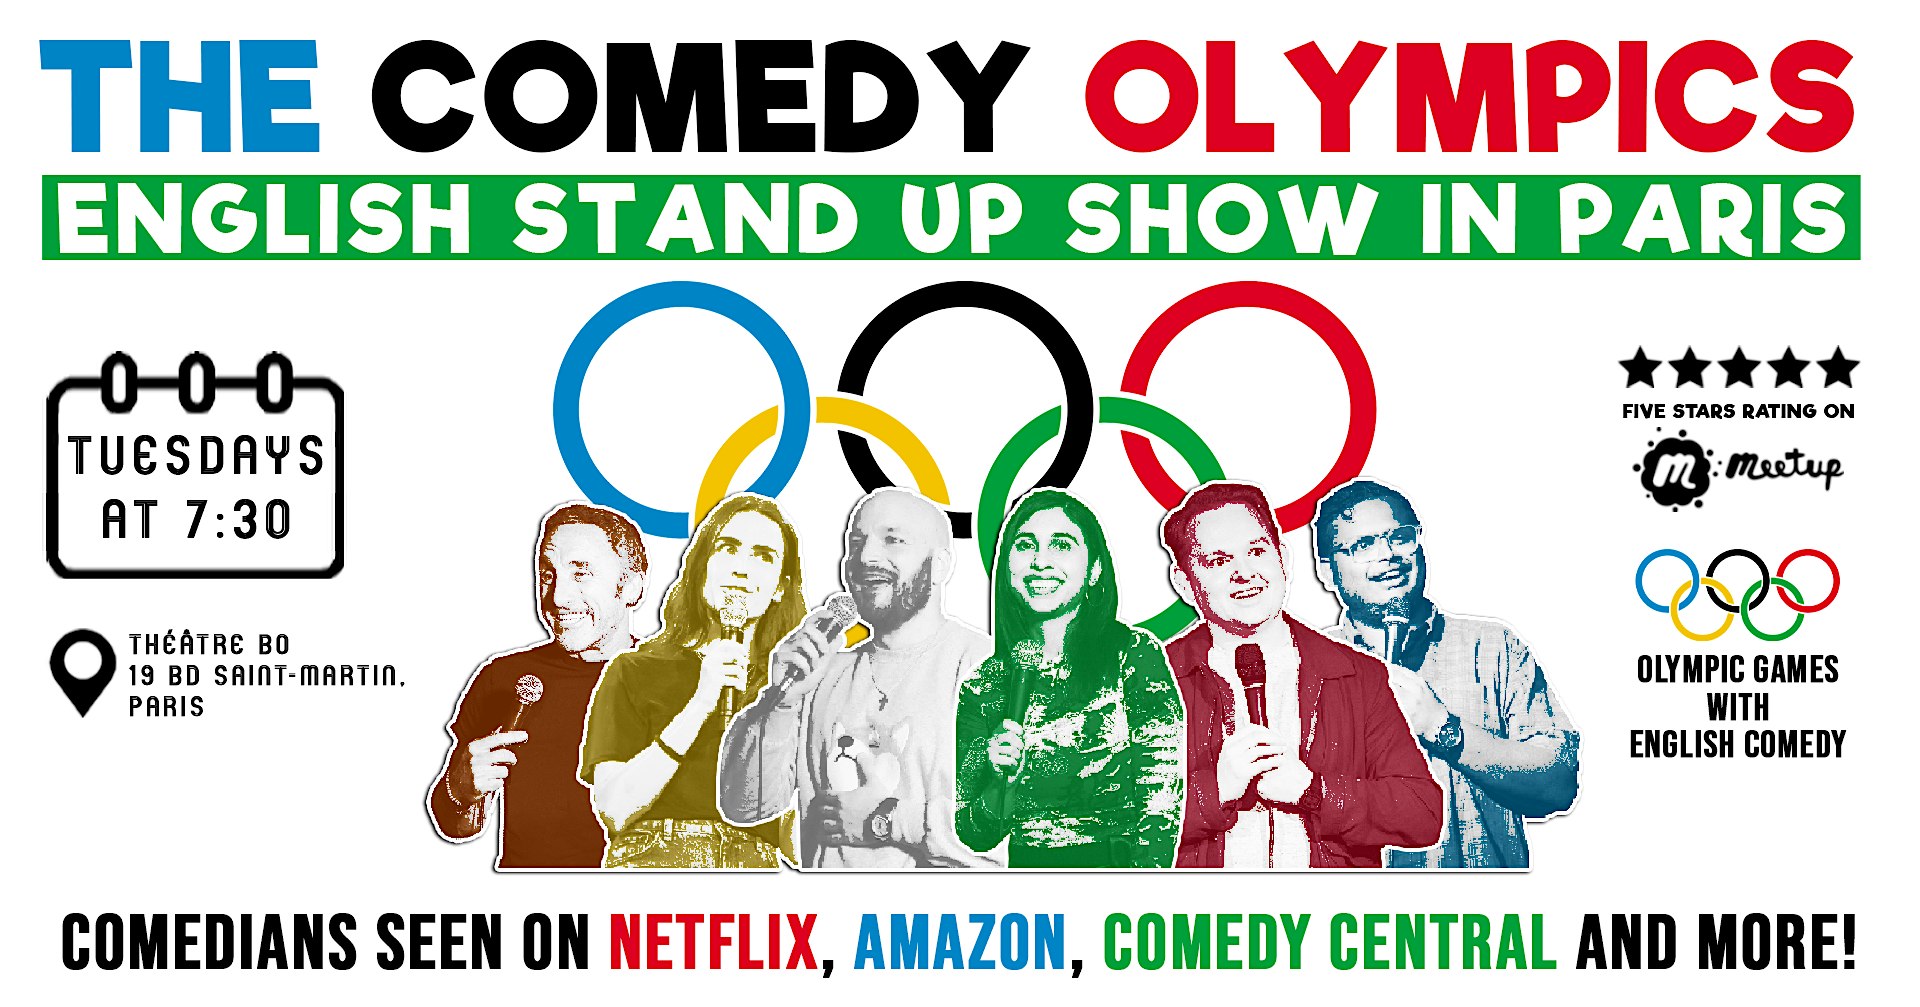 The Comedy Olympics | English Stand-Up Show in Paris